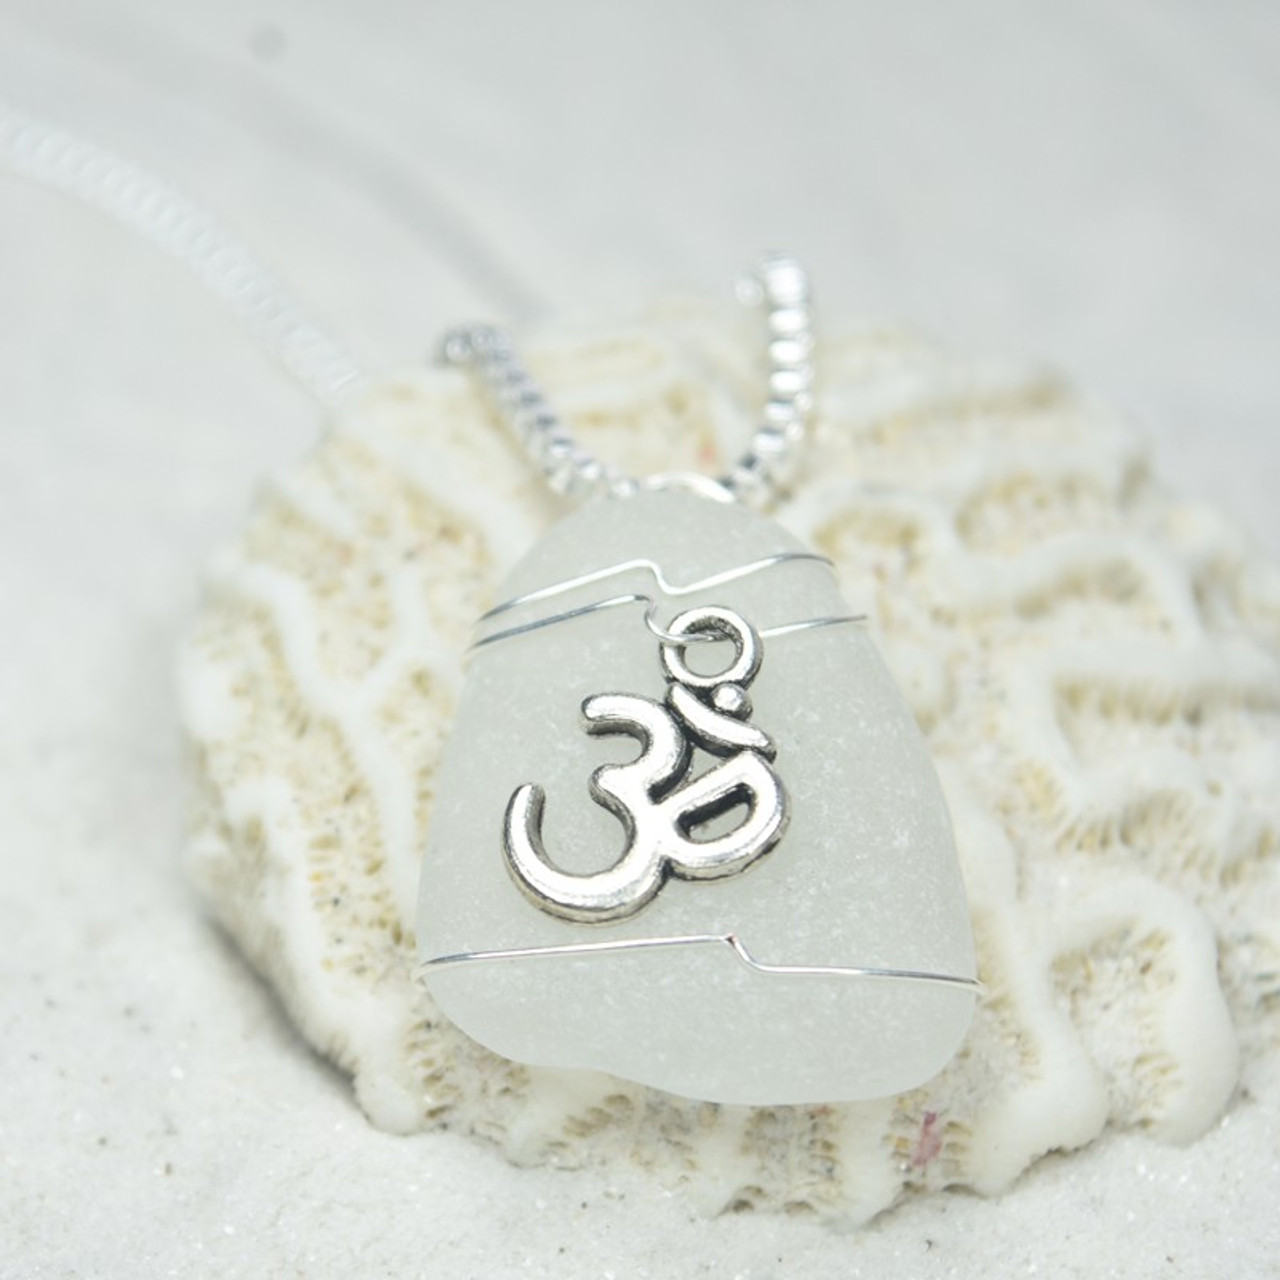 Genuine Sea Glass Necklace with a Silver Yoga Ohm Charm - Choose the Color - Frosted, Green, Brown, or Aqua - Made to Order